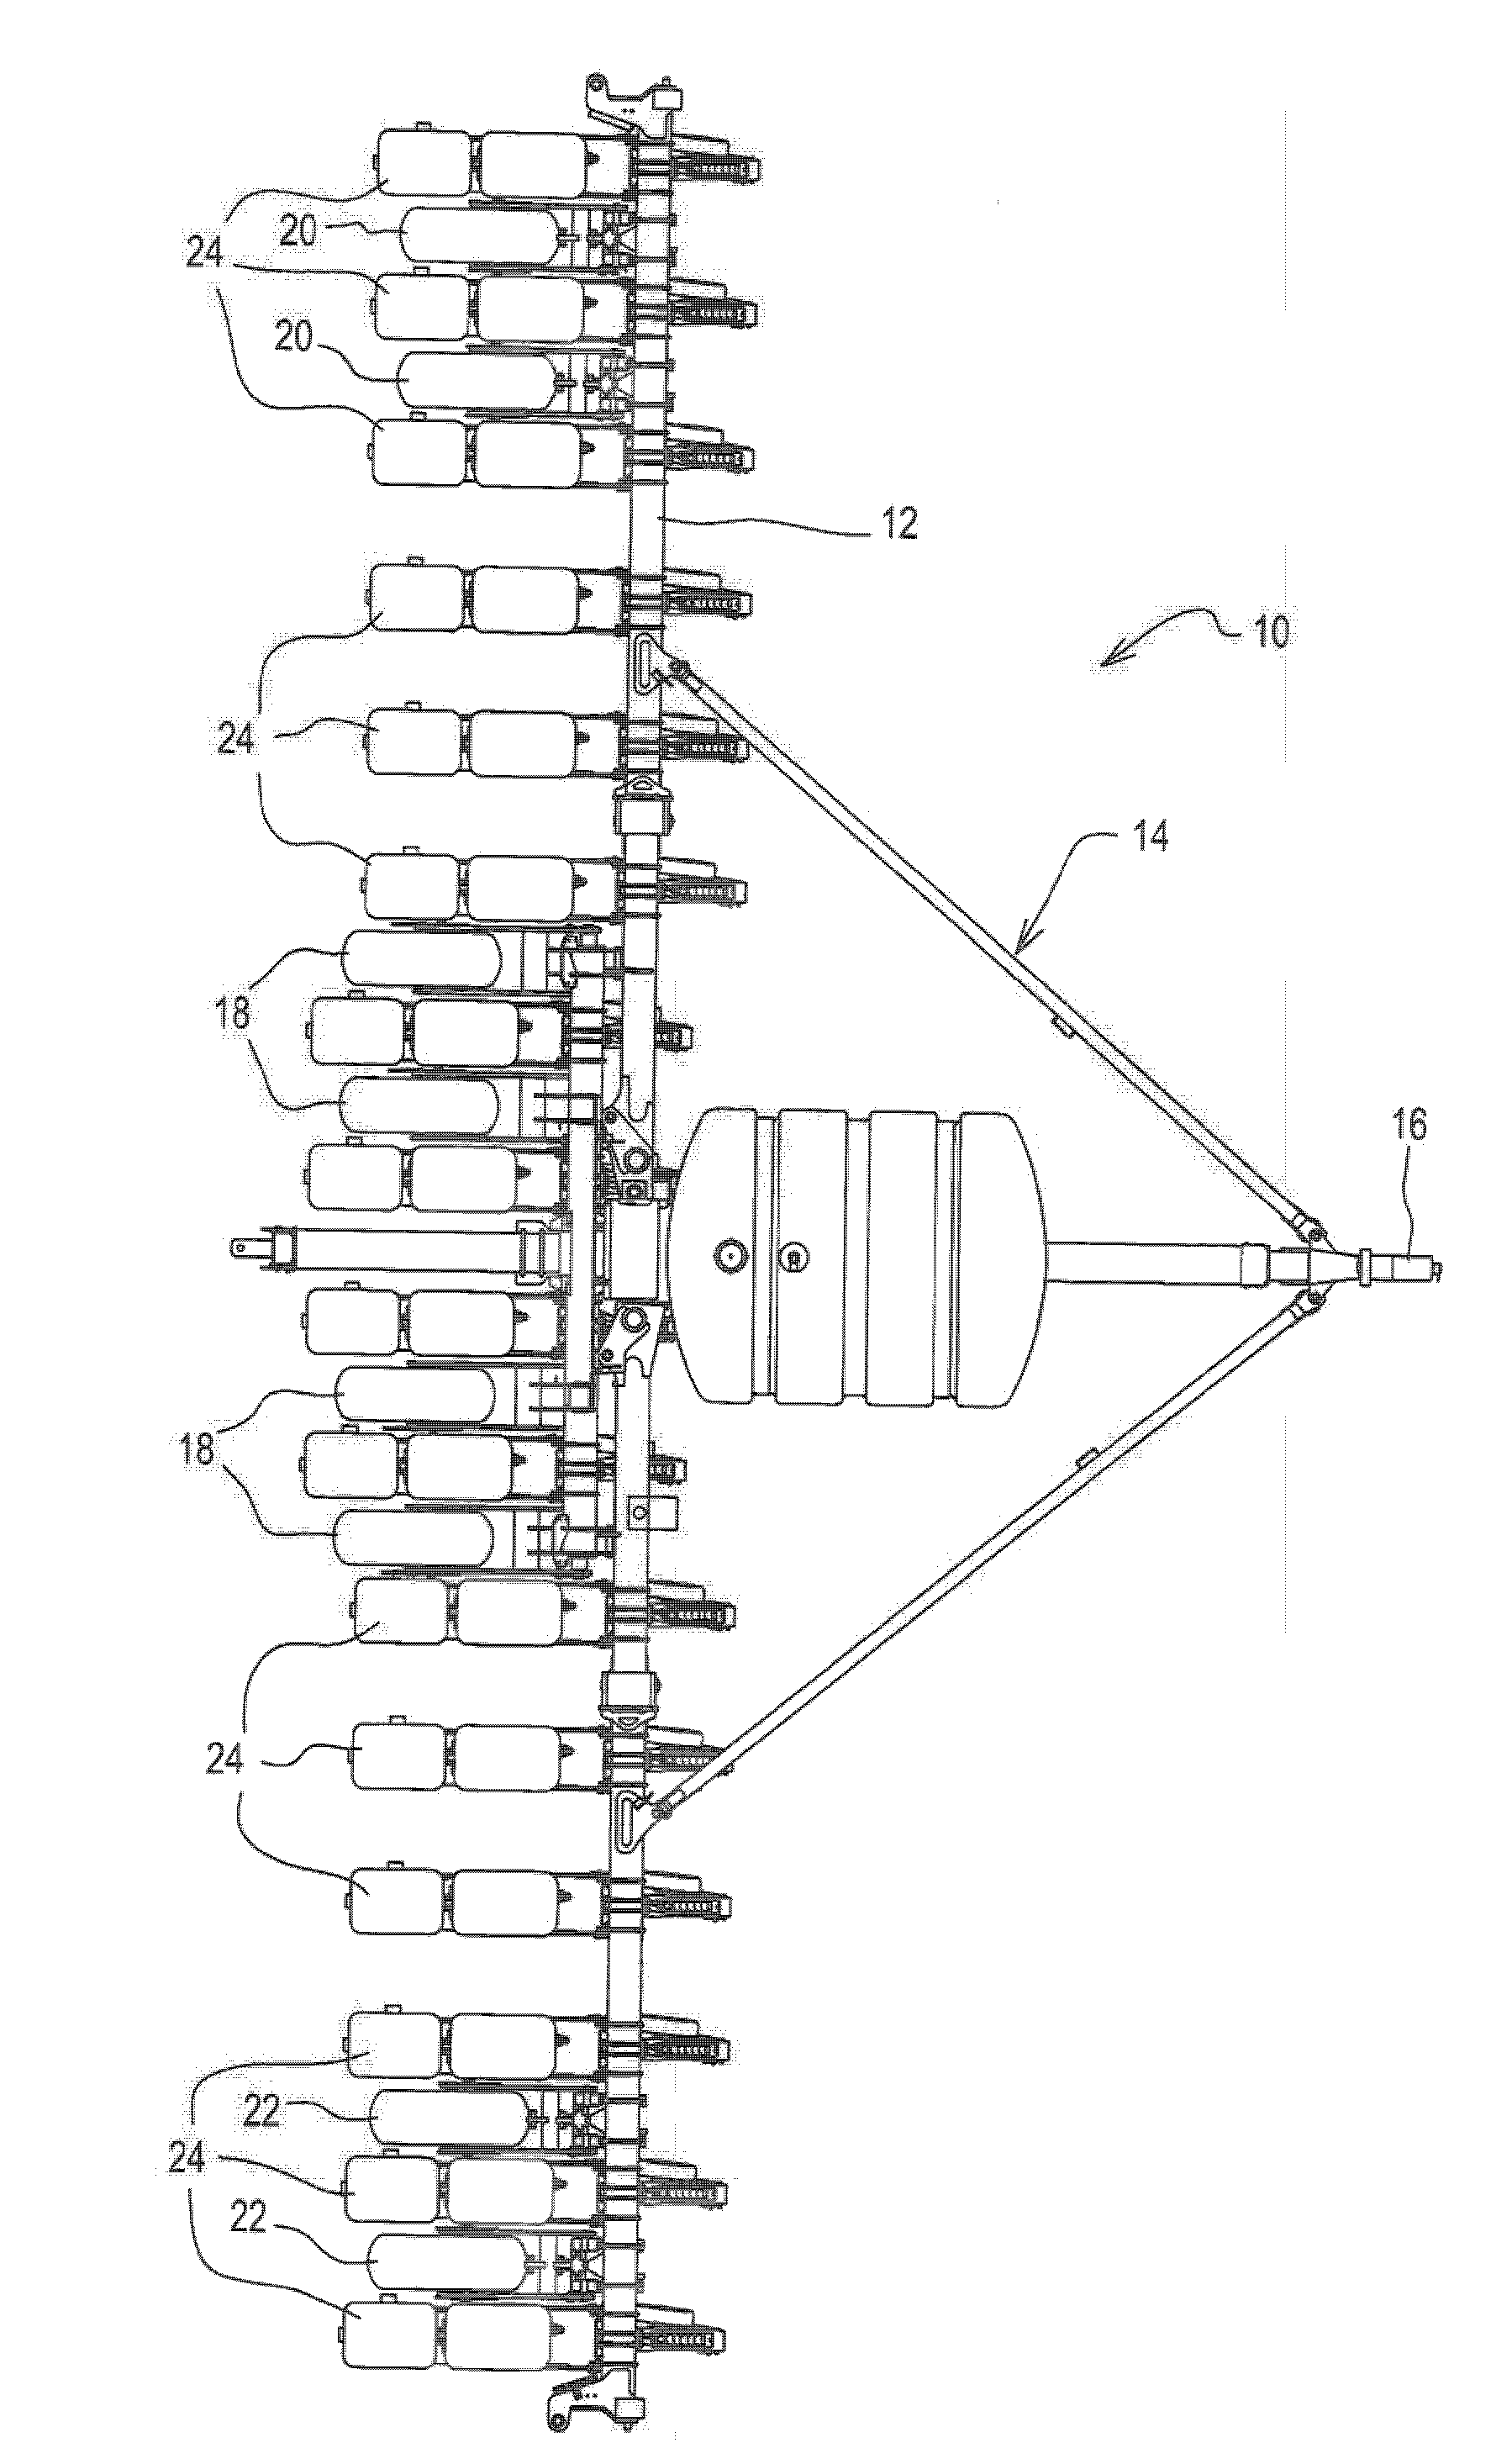 Planter and method of operating a planter with individual meter control